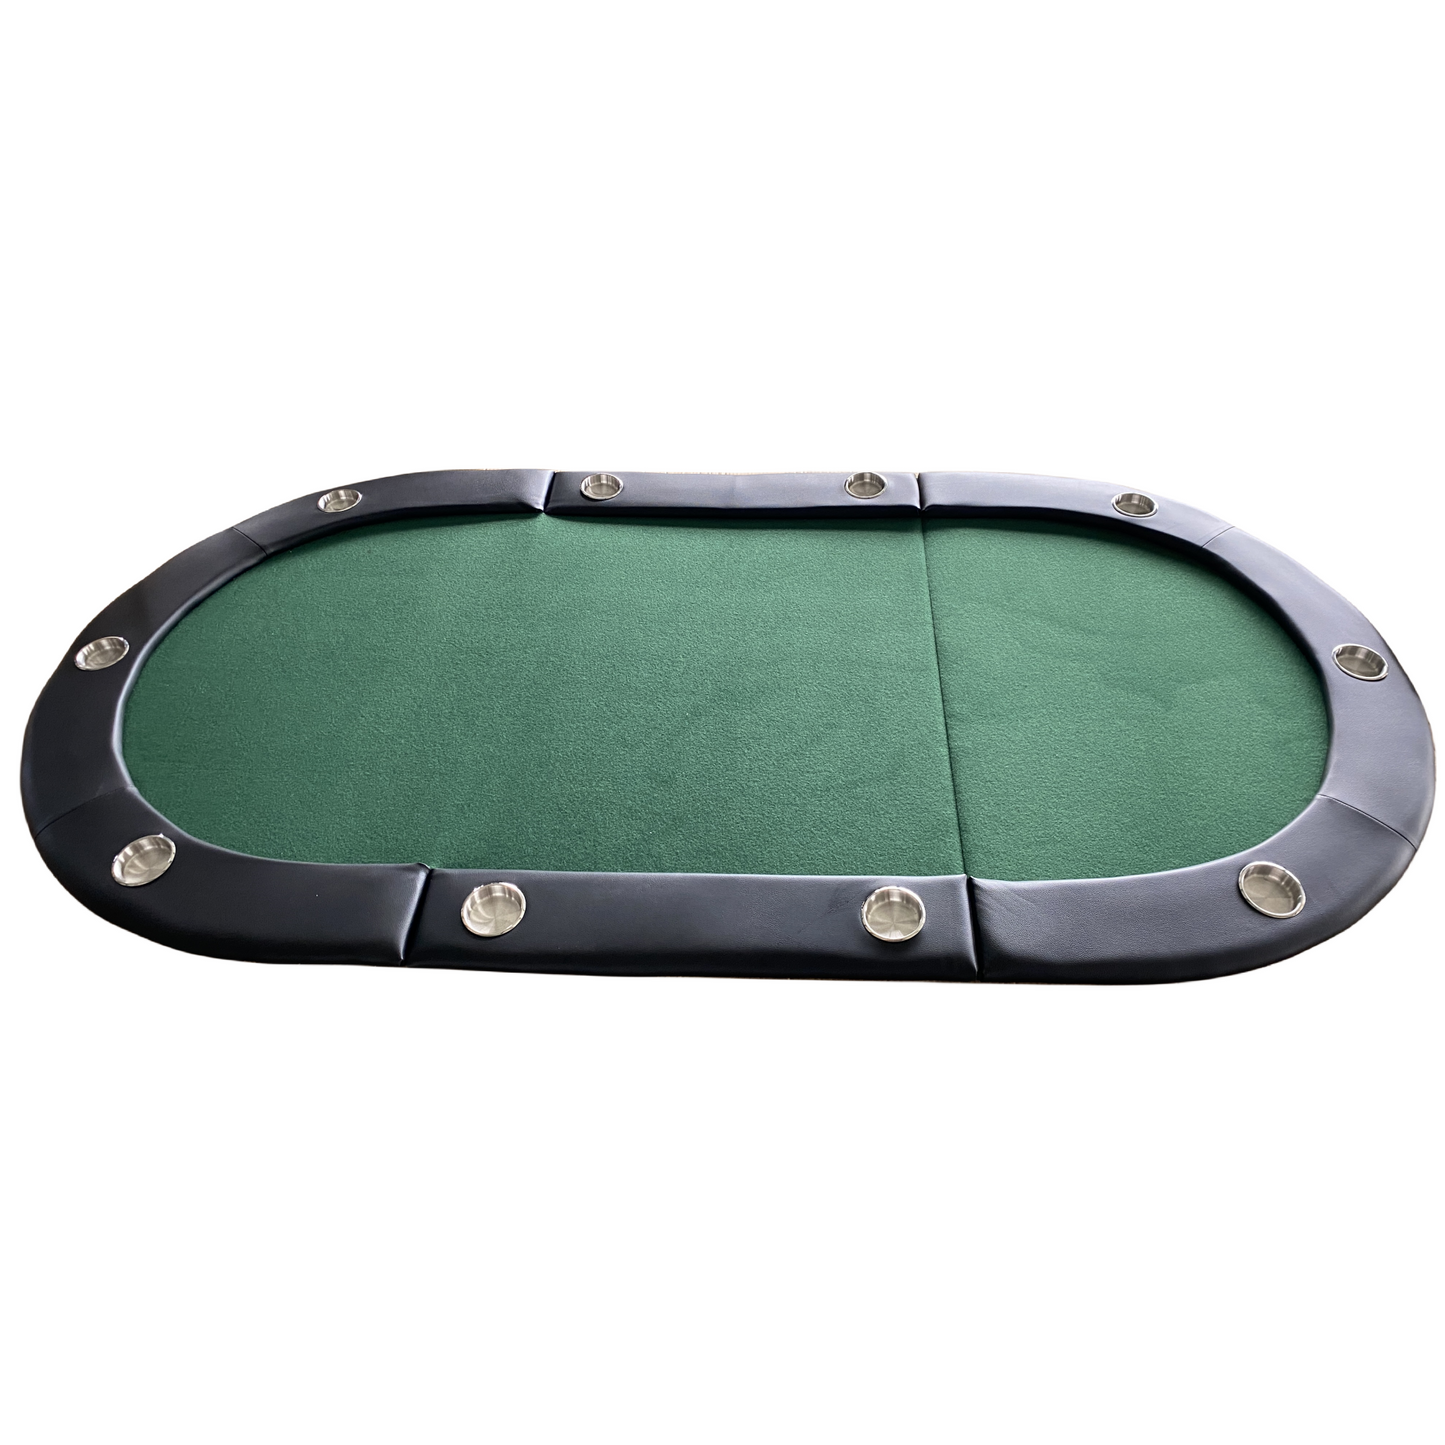 84" 10 Player Texas Hold'em Folding Poker Table Top with Carrying Bag